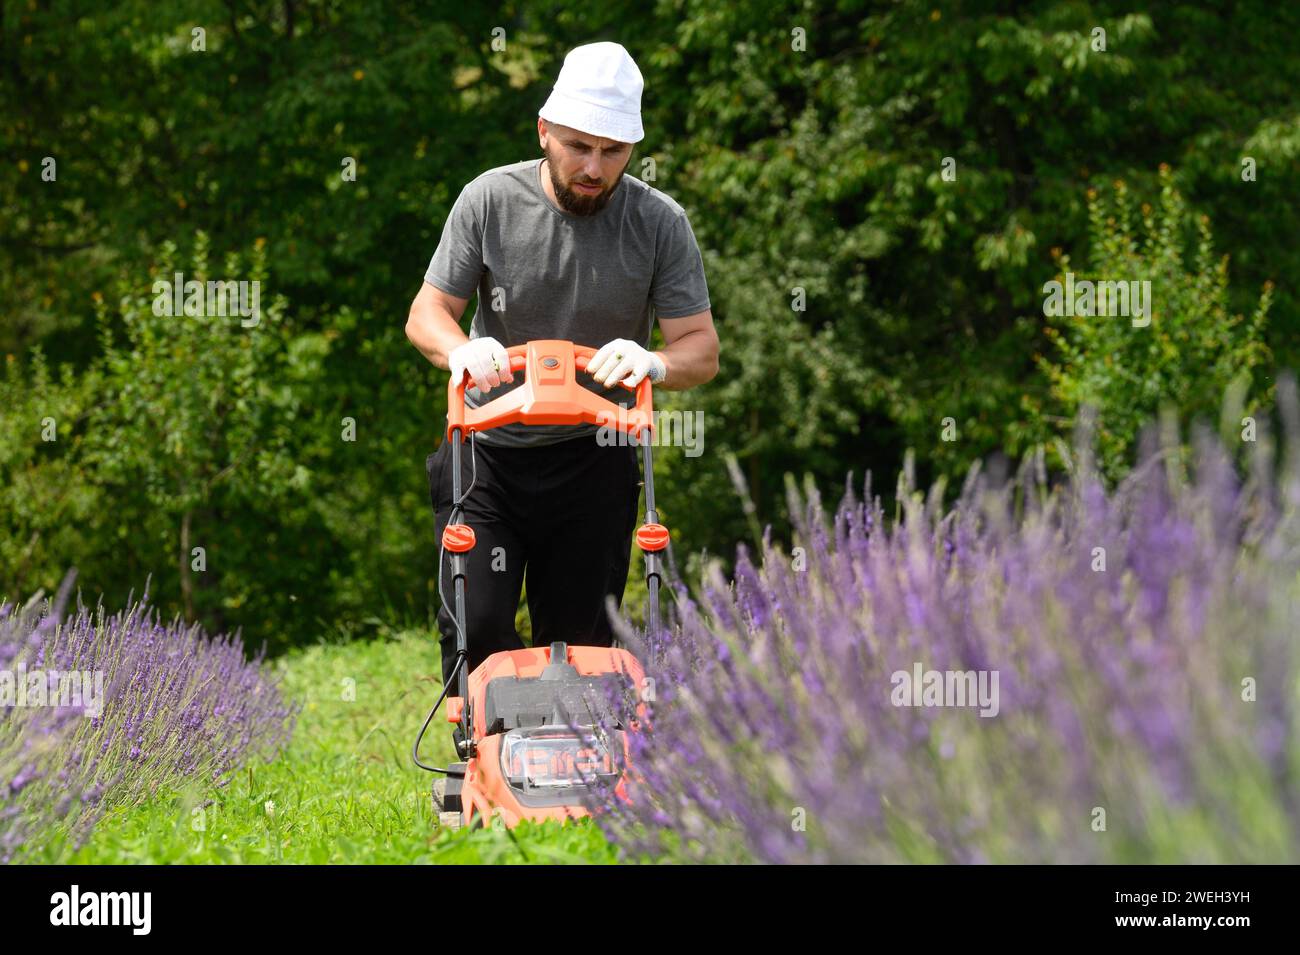 Mowing the grass in the lavender field with an electric lawnmower, an economical and environmentally friendly lawnmower. Lithium Ion battery powered E Stock Photo